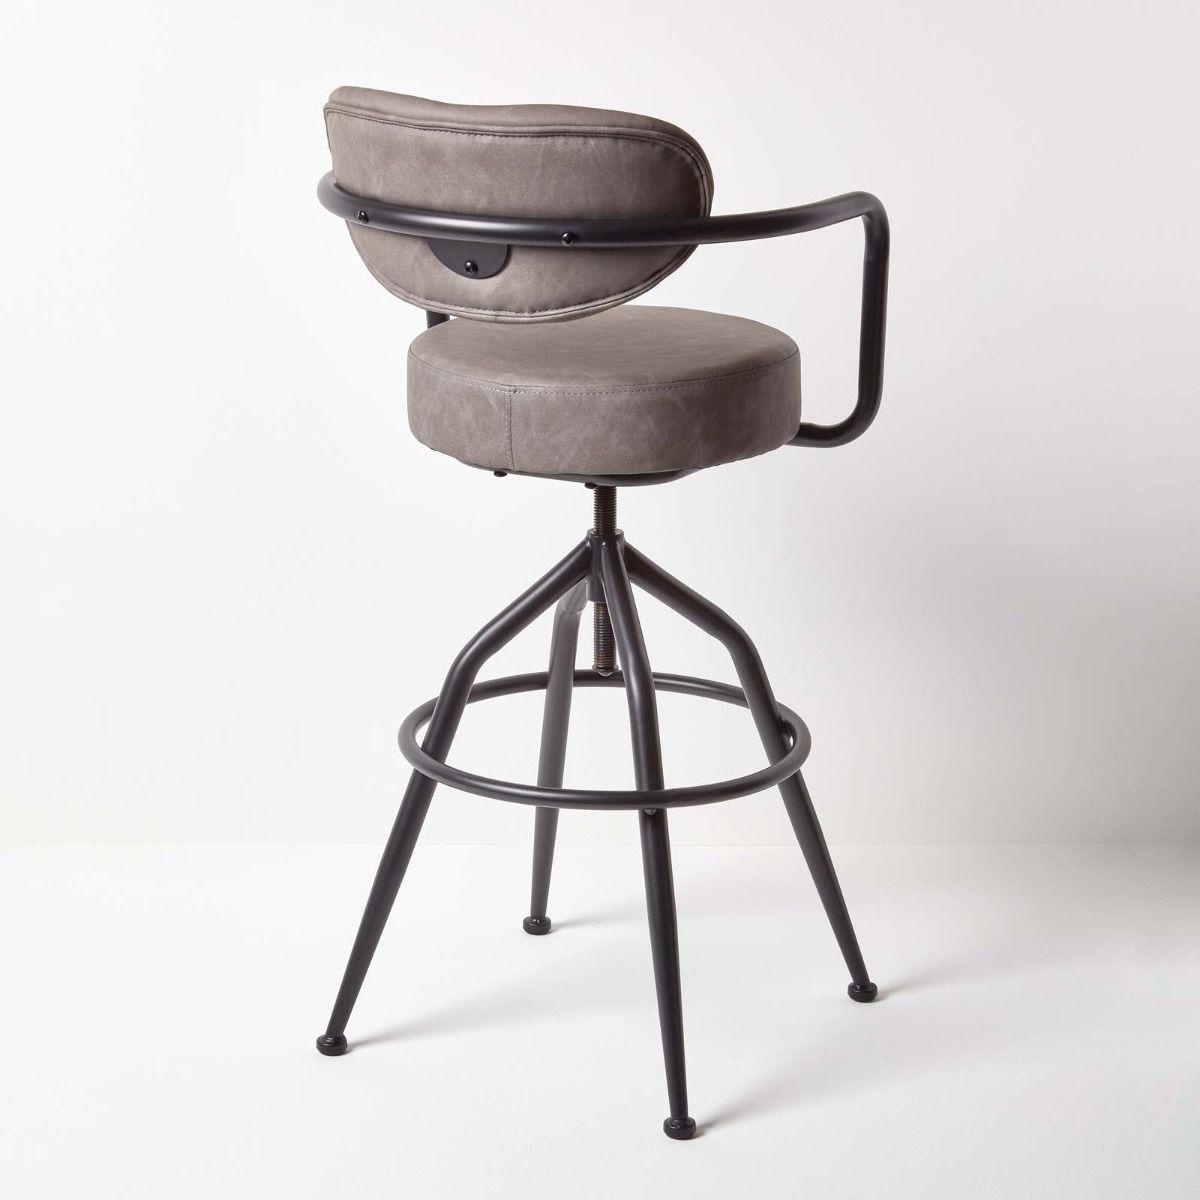 Rochester Leather Bar Stool Grey, Rochester Bar Stools